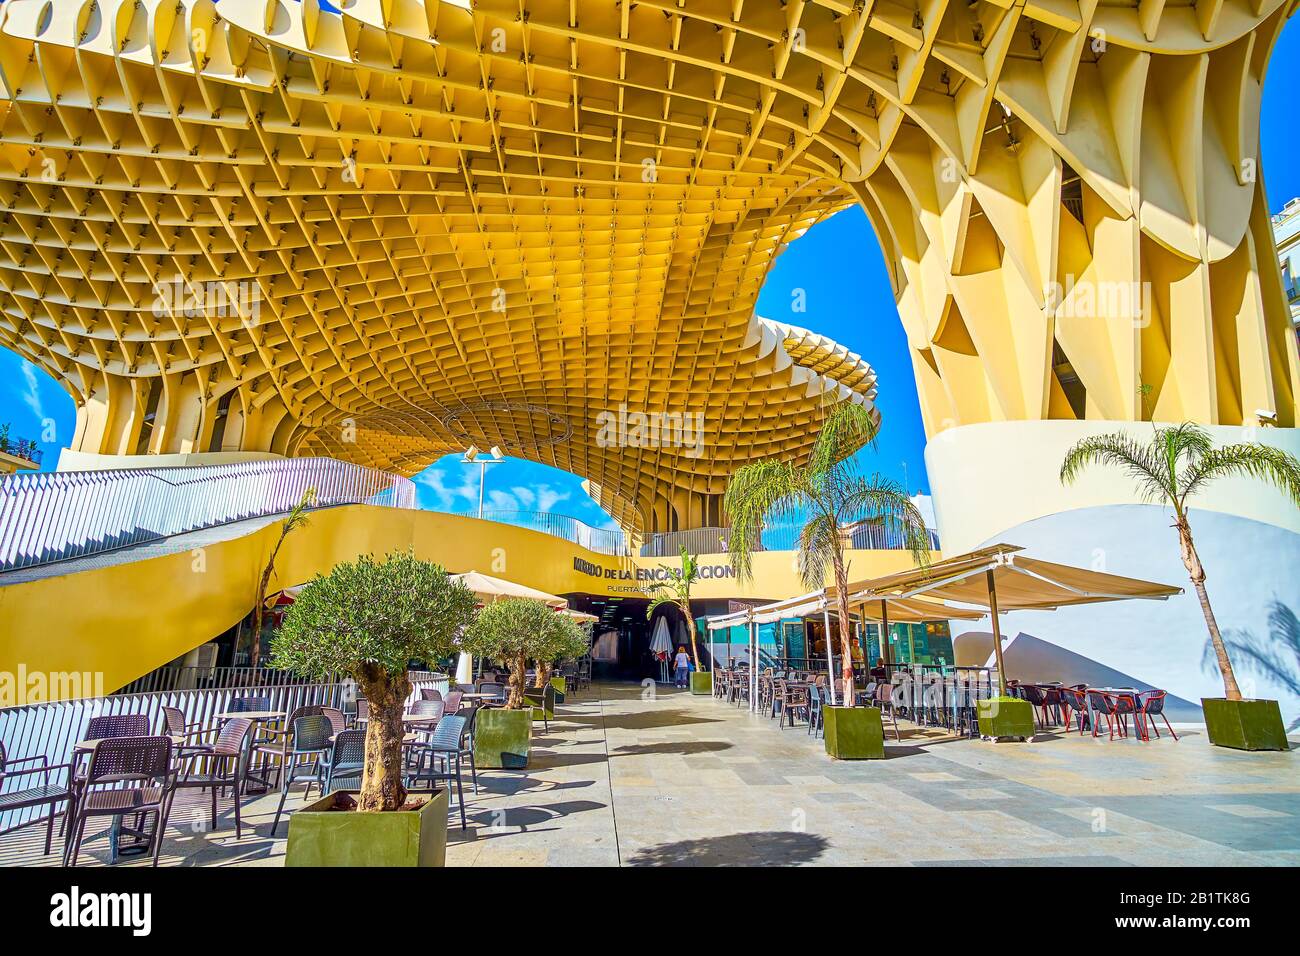 SEVILLE, SPAIN - OCTOBER 1, 2019: The entrance to the restaurant of Metropol Parasol complex with the outdoor terraces on the ground floor, on October Stock Photo